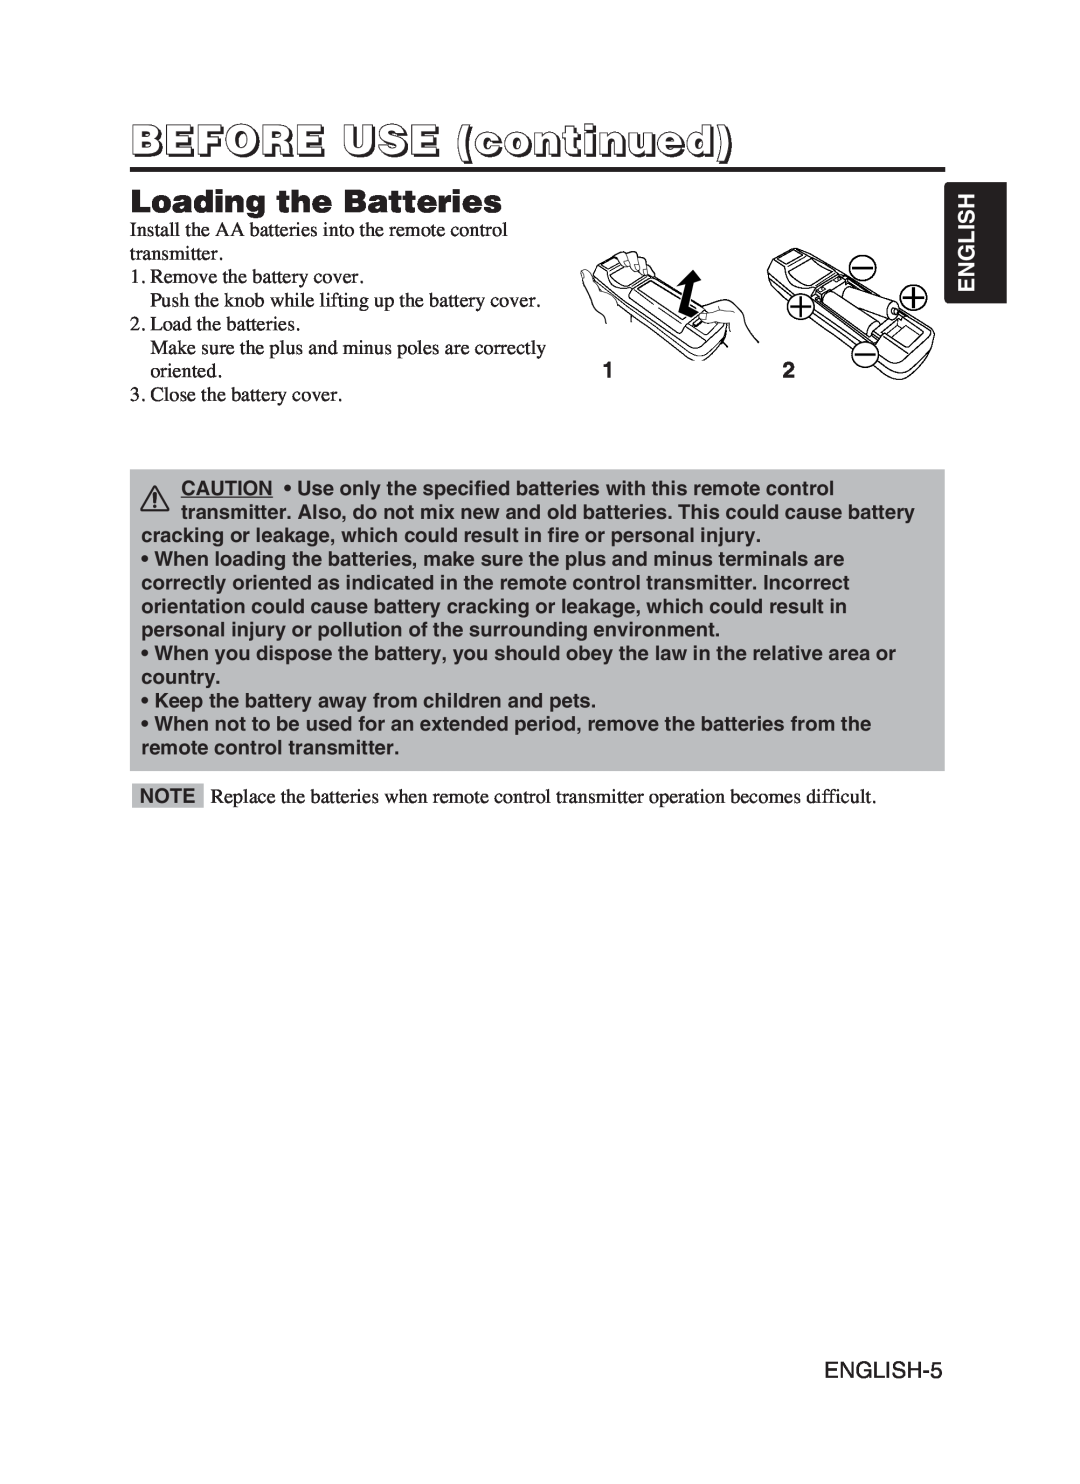 Hitachi CP-SX5600W user manual Loading the Batteries, BEFORE USE continued, English, ENGLISH-5 